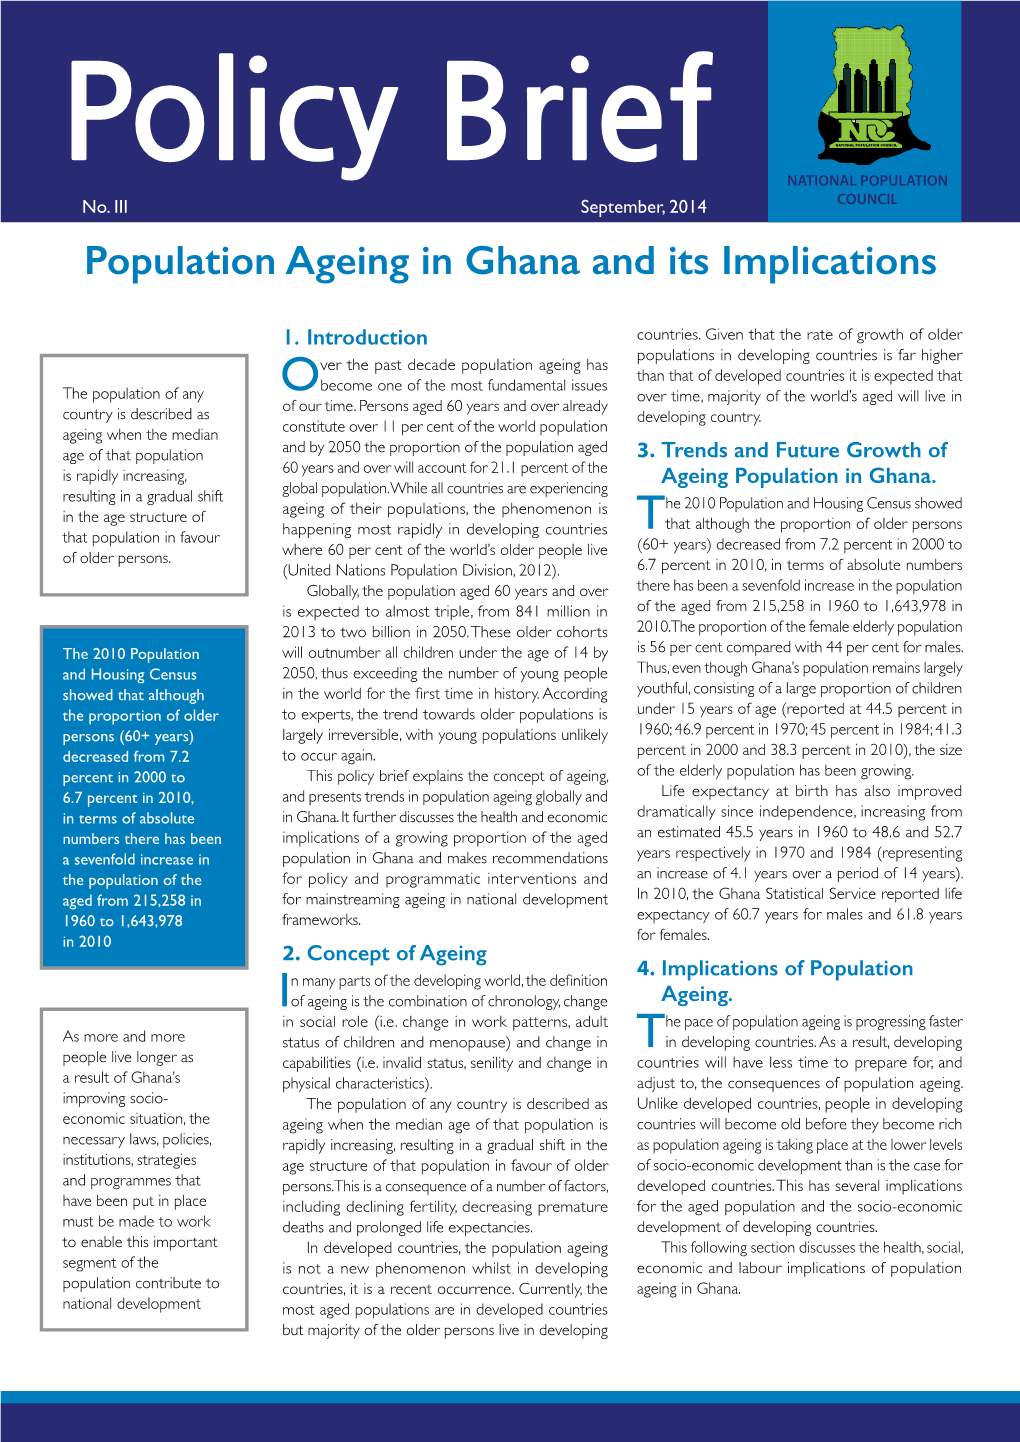 Population Ageing in Ghana and Its Implications